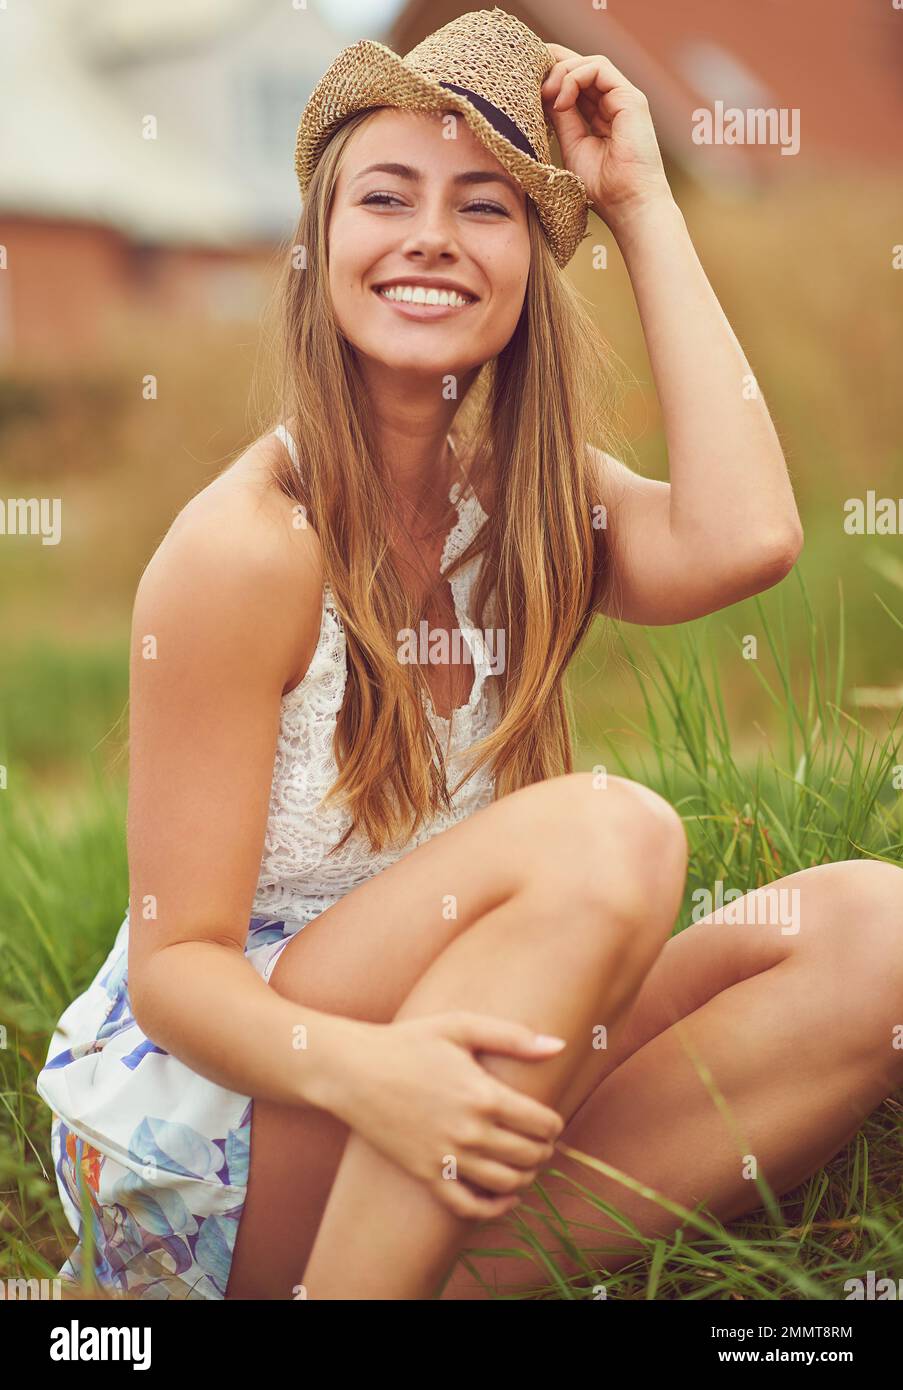 Find happiness in the simplest things. a young woman sitting in a field in the countryside. Stock Photo